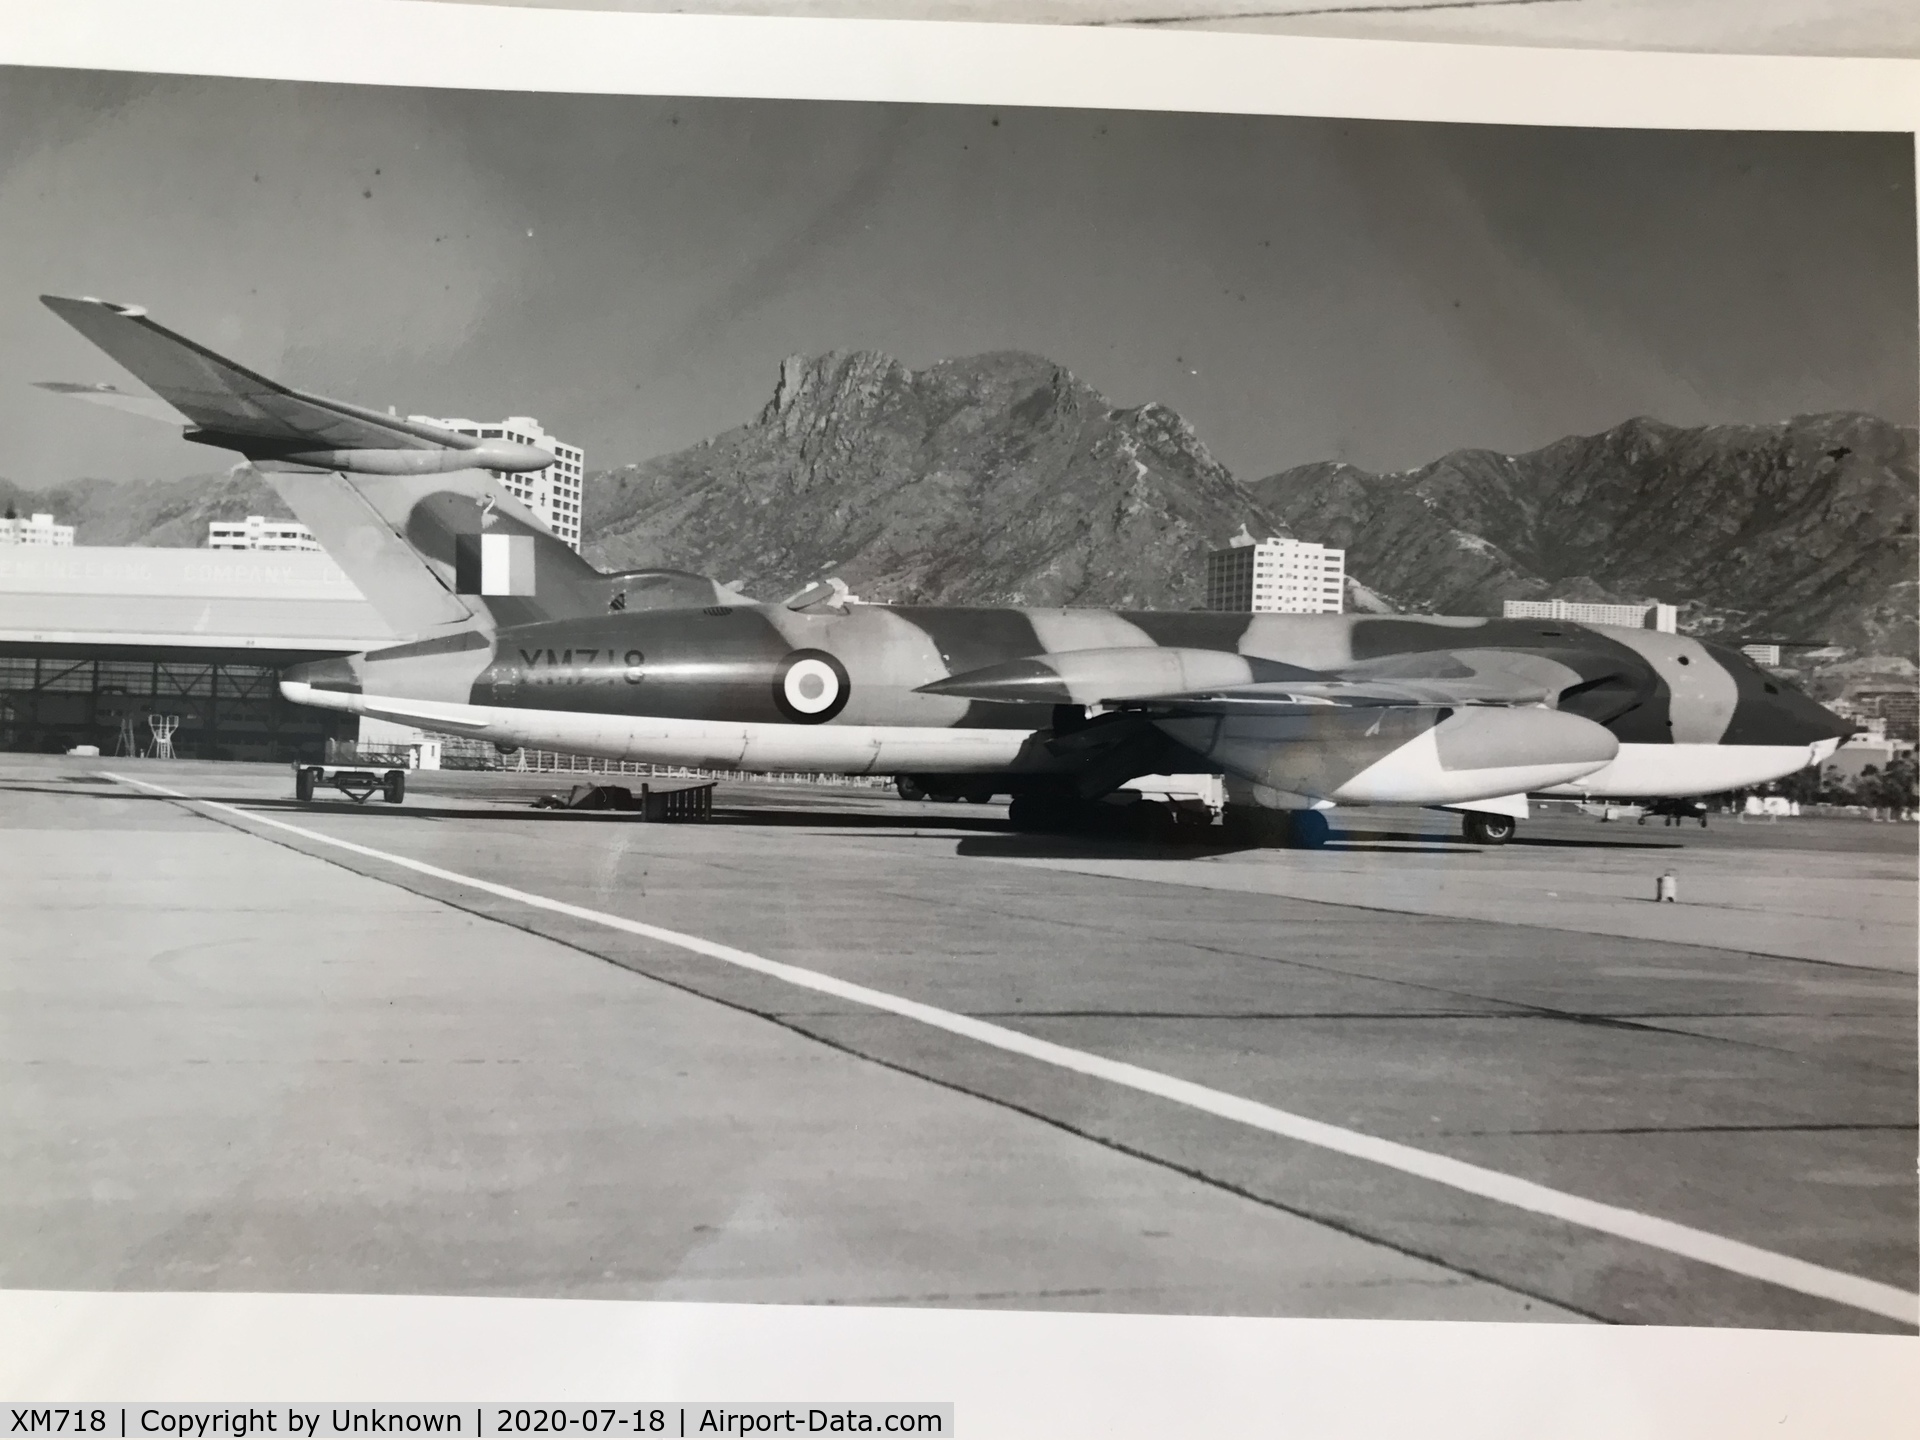 XM718, 1963 Handley Page Victor SR.2 C/N Not found XM718, Photo found amongst my fathers paperwork